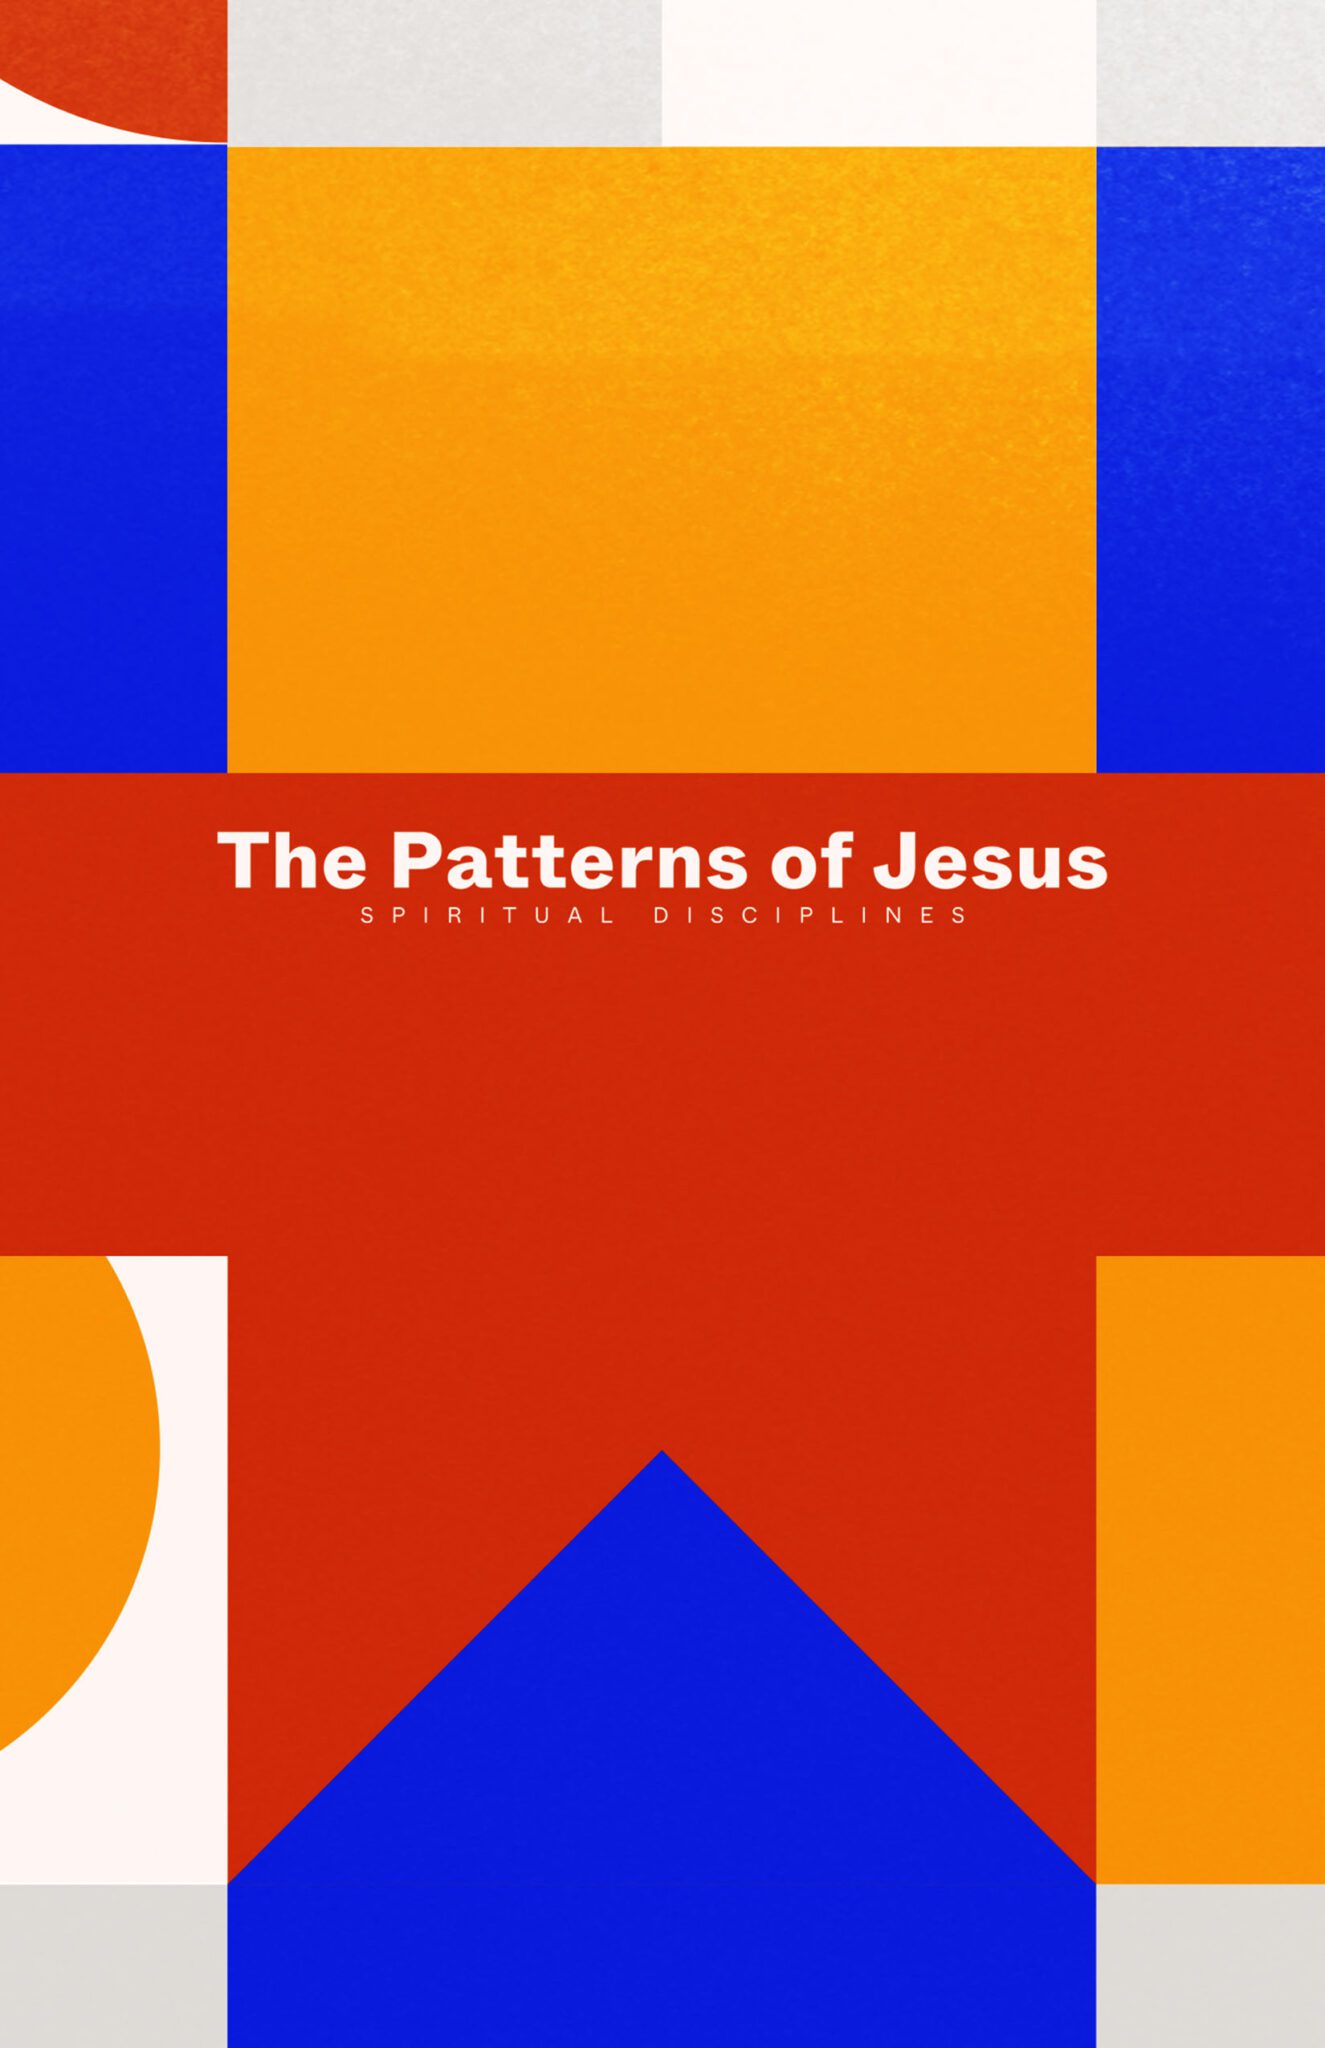 The Patterns of Jesus: Accepting Limitations